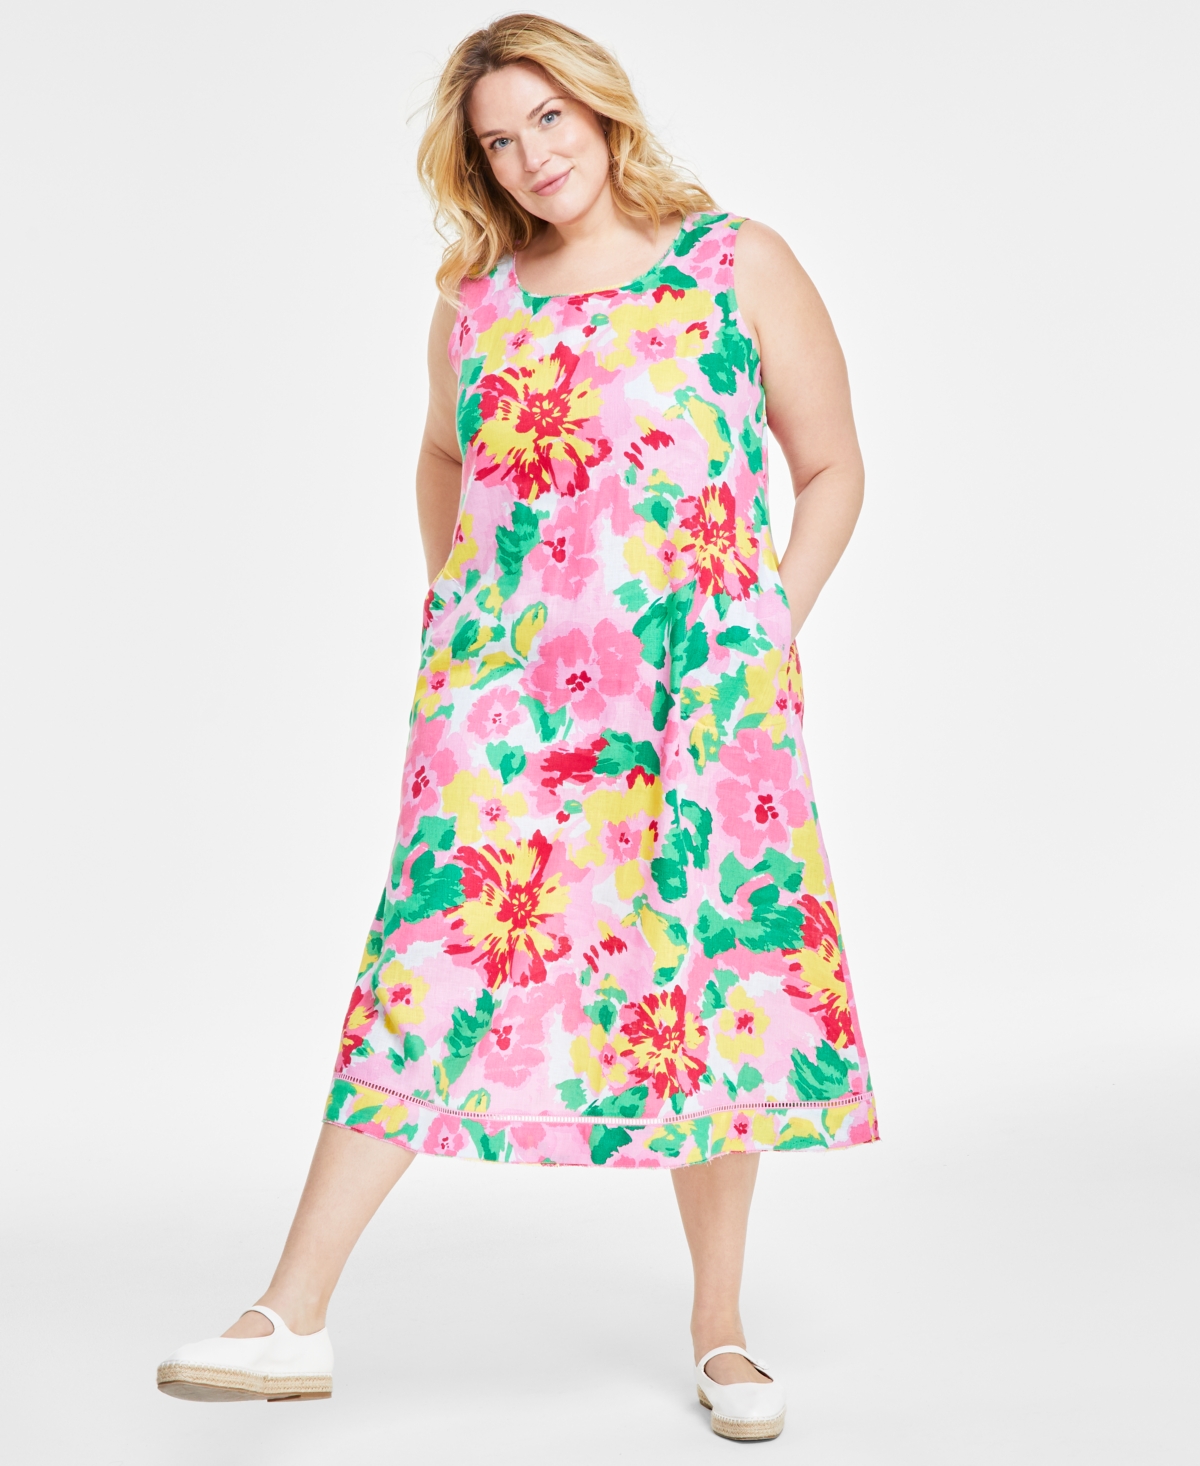 Plus Size 100% Linen Printed Maxi Tank Dress, Created for Macy's - Buble Bath Combo